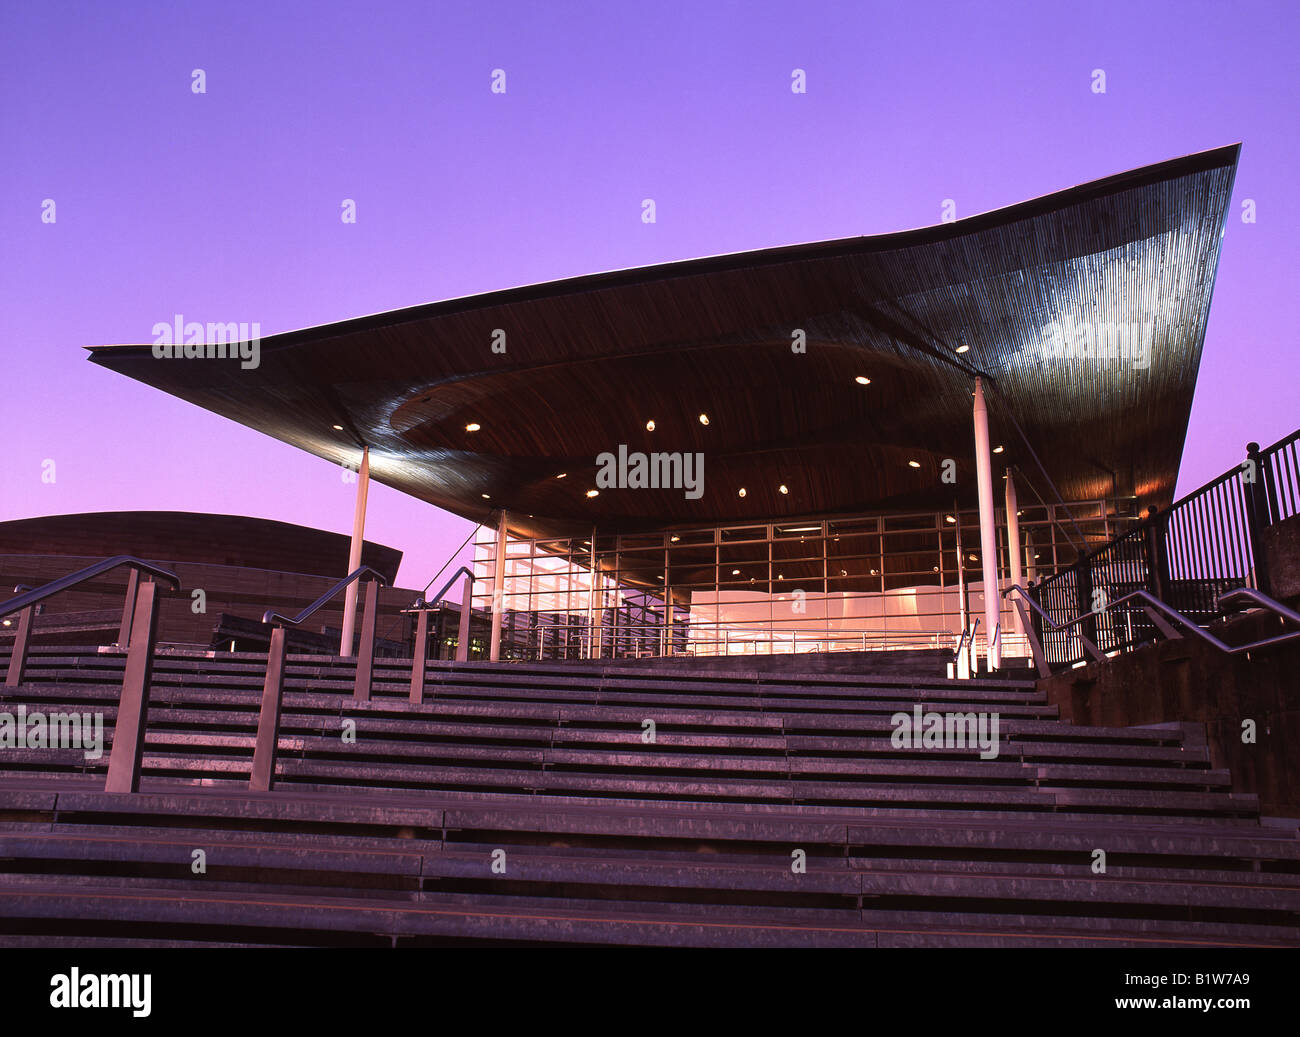 Senedd National Assembly for Wales Building Twilight dusk view Cardiff Bay Cardiff South Wales Stock Photo